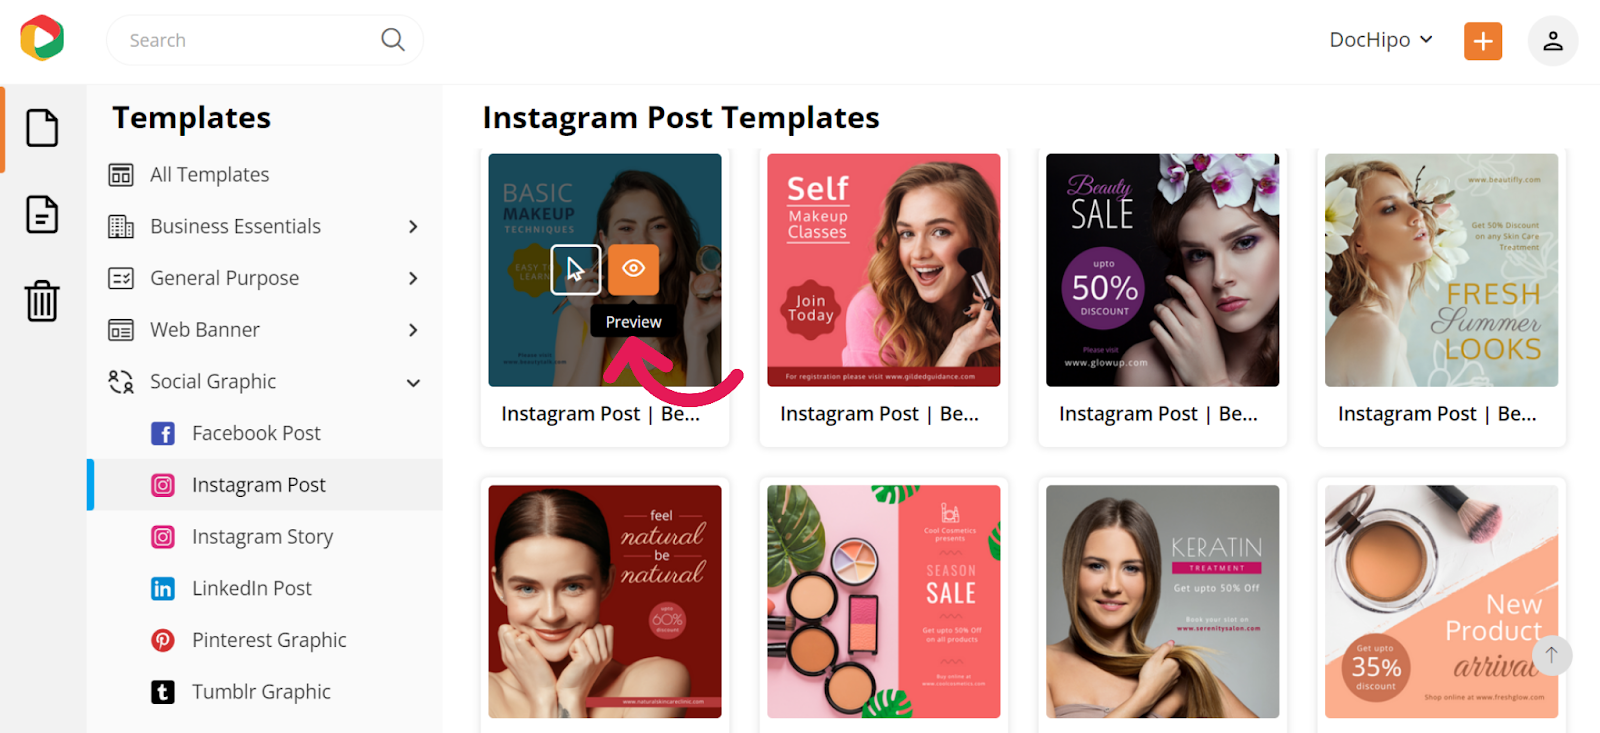 Preview Instagram Post Template in DocHipo